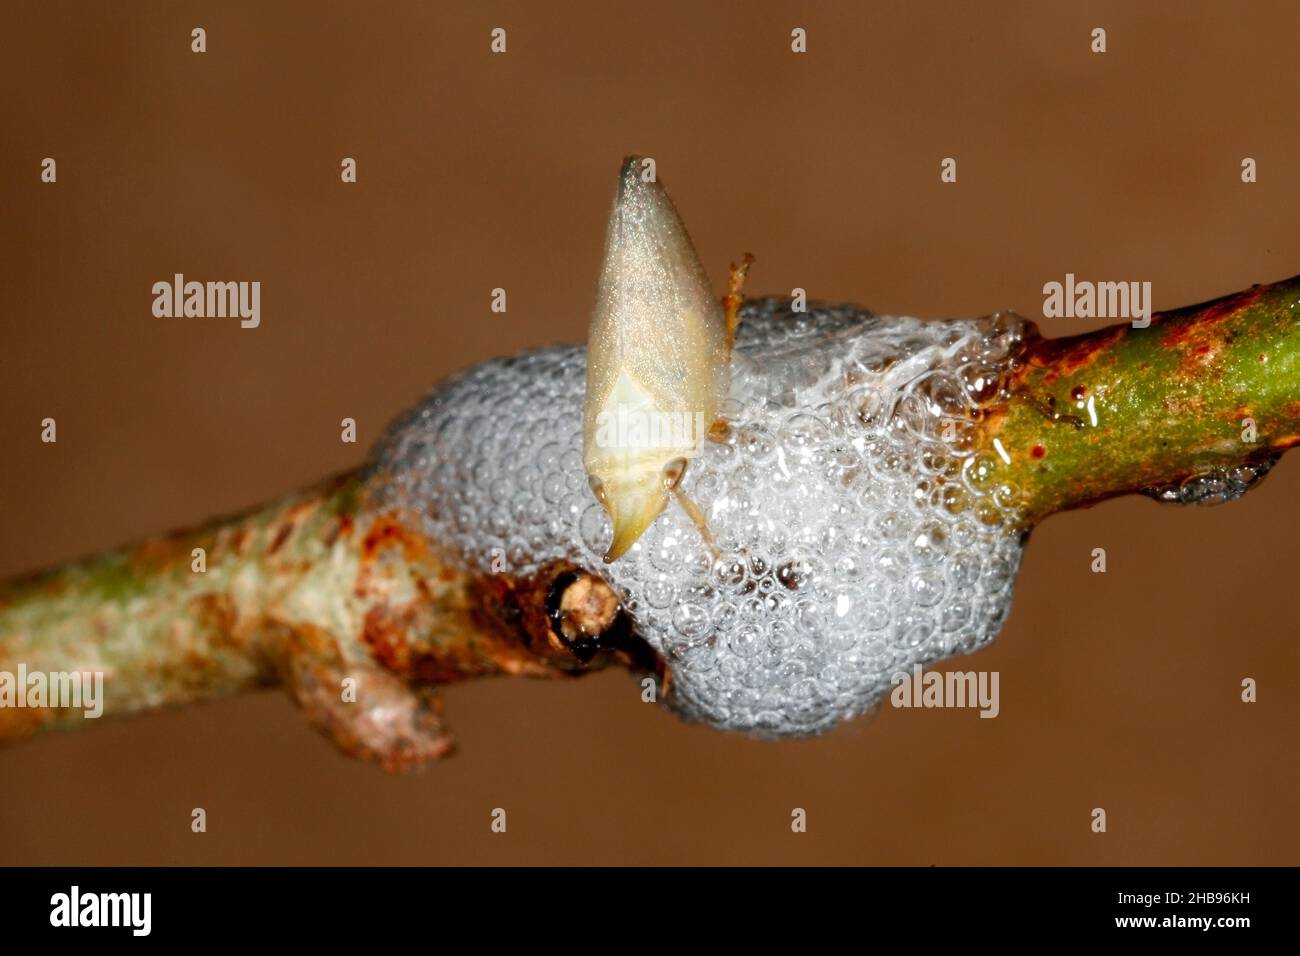 Instar of the Common Spittlebug, Philagra parva. Nymphs produce 'spittle' clinging to stems of shrubs or small trees. See below for more information. Stock Photo